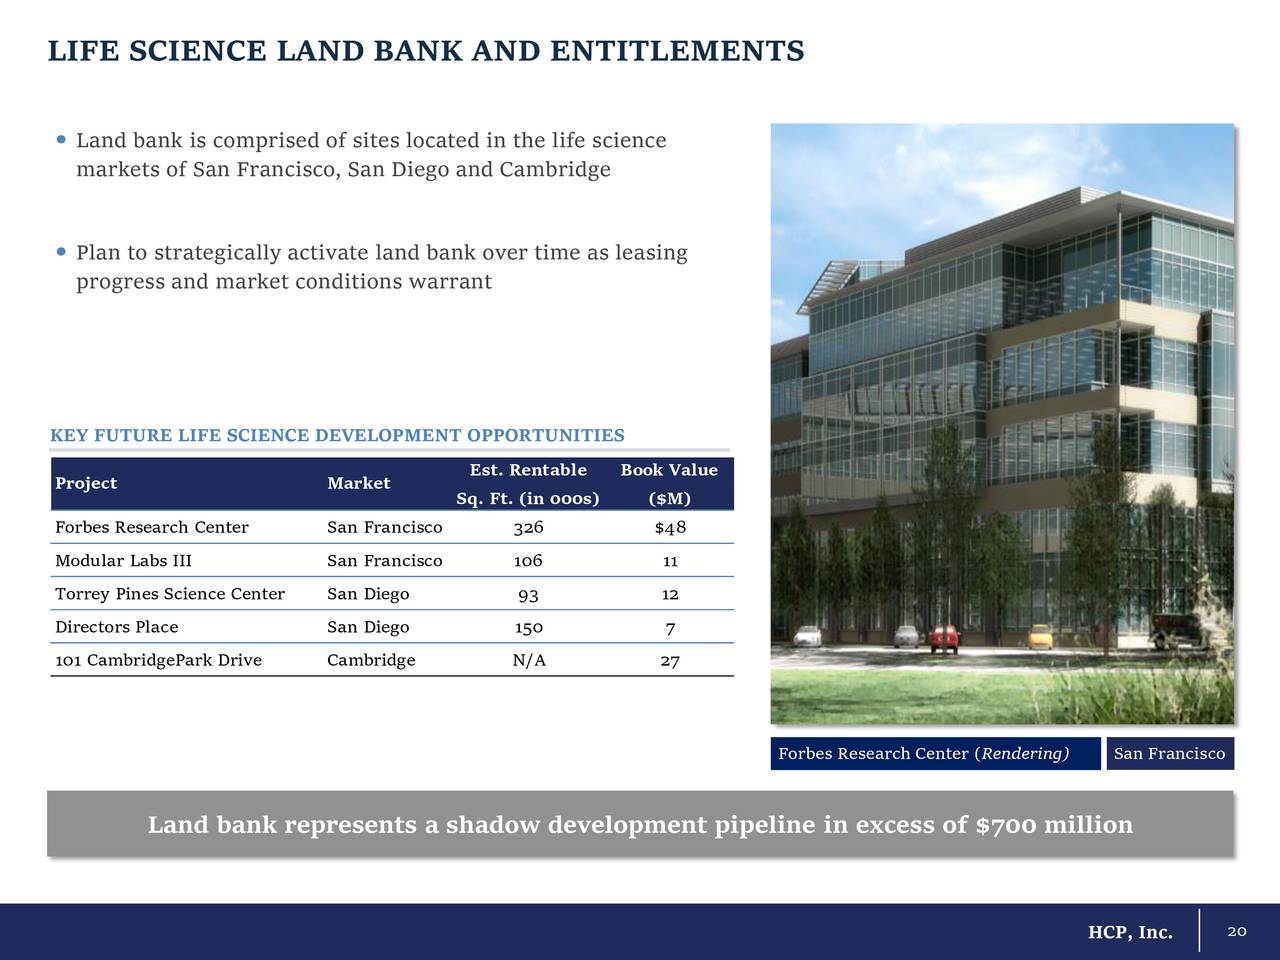 LIFE SCIENCE LAND BANK AND ENTITLEMENTS